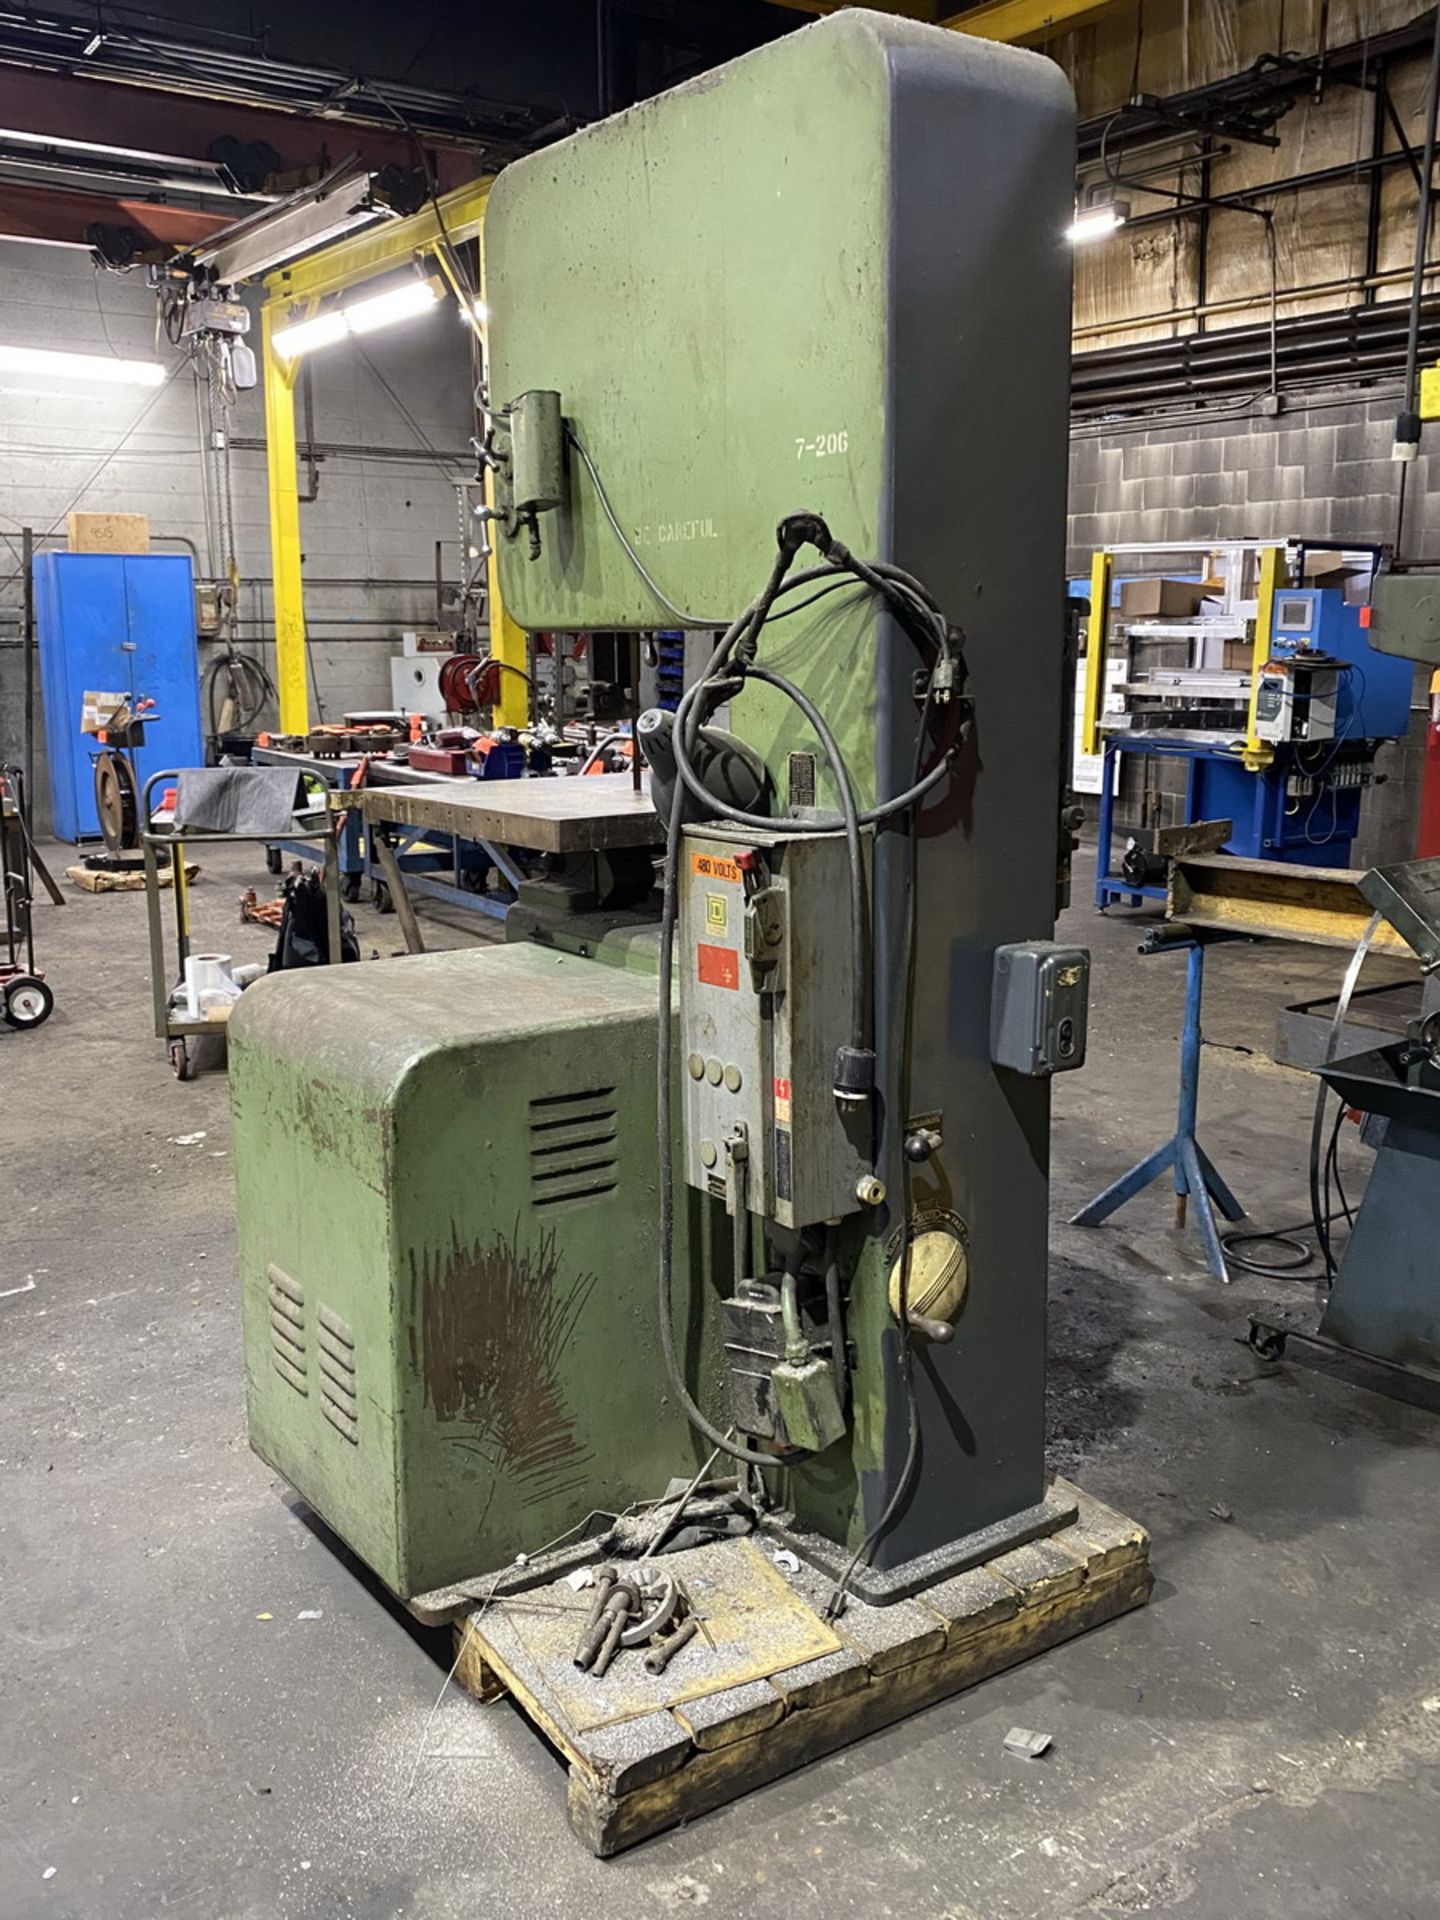 DoAll 26 in. Job Selector Vertical Band Saw; with Blade Welder & Grinder (Ref. #: B-Saw-1) - Image 4 of 8